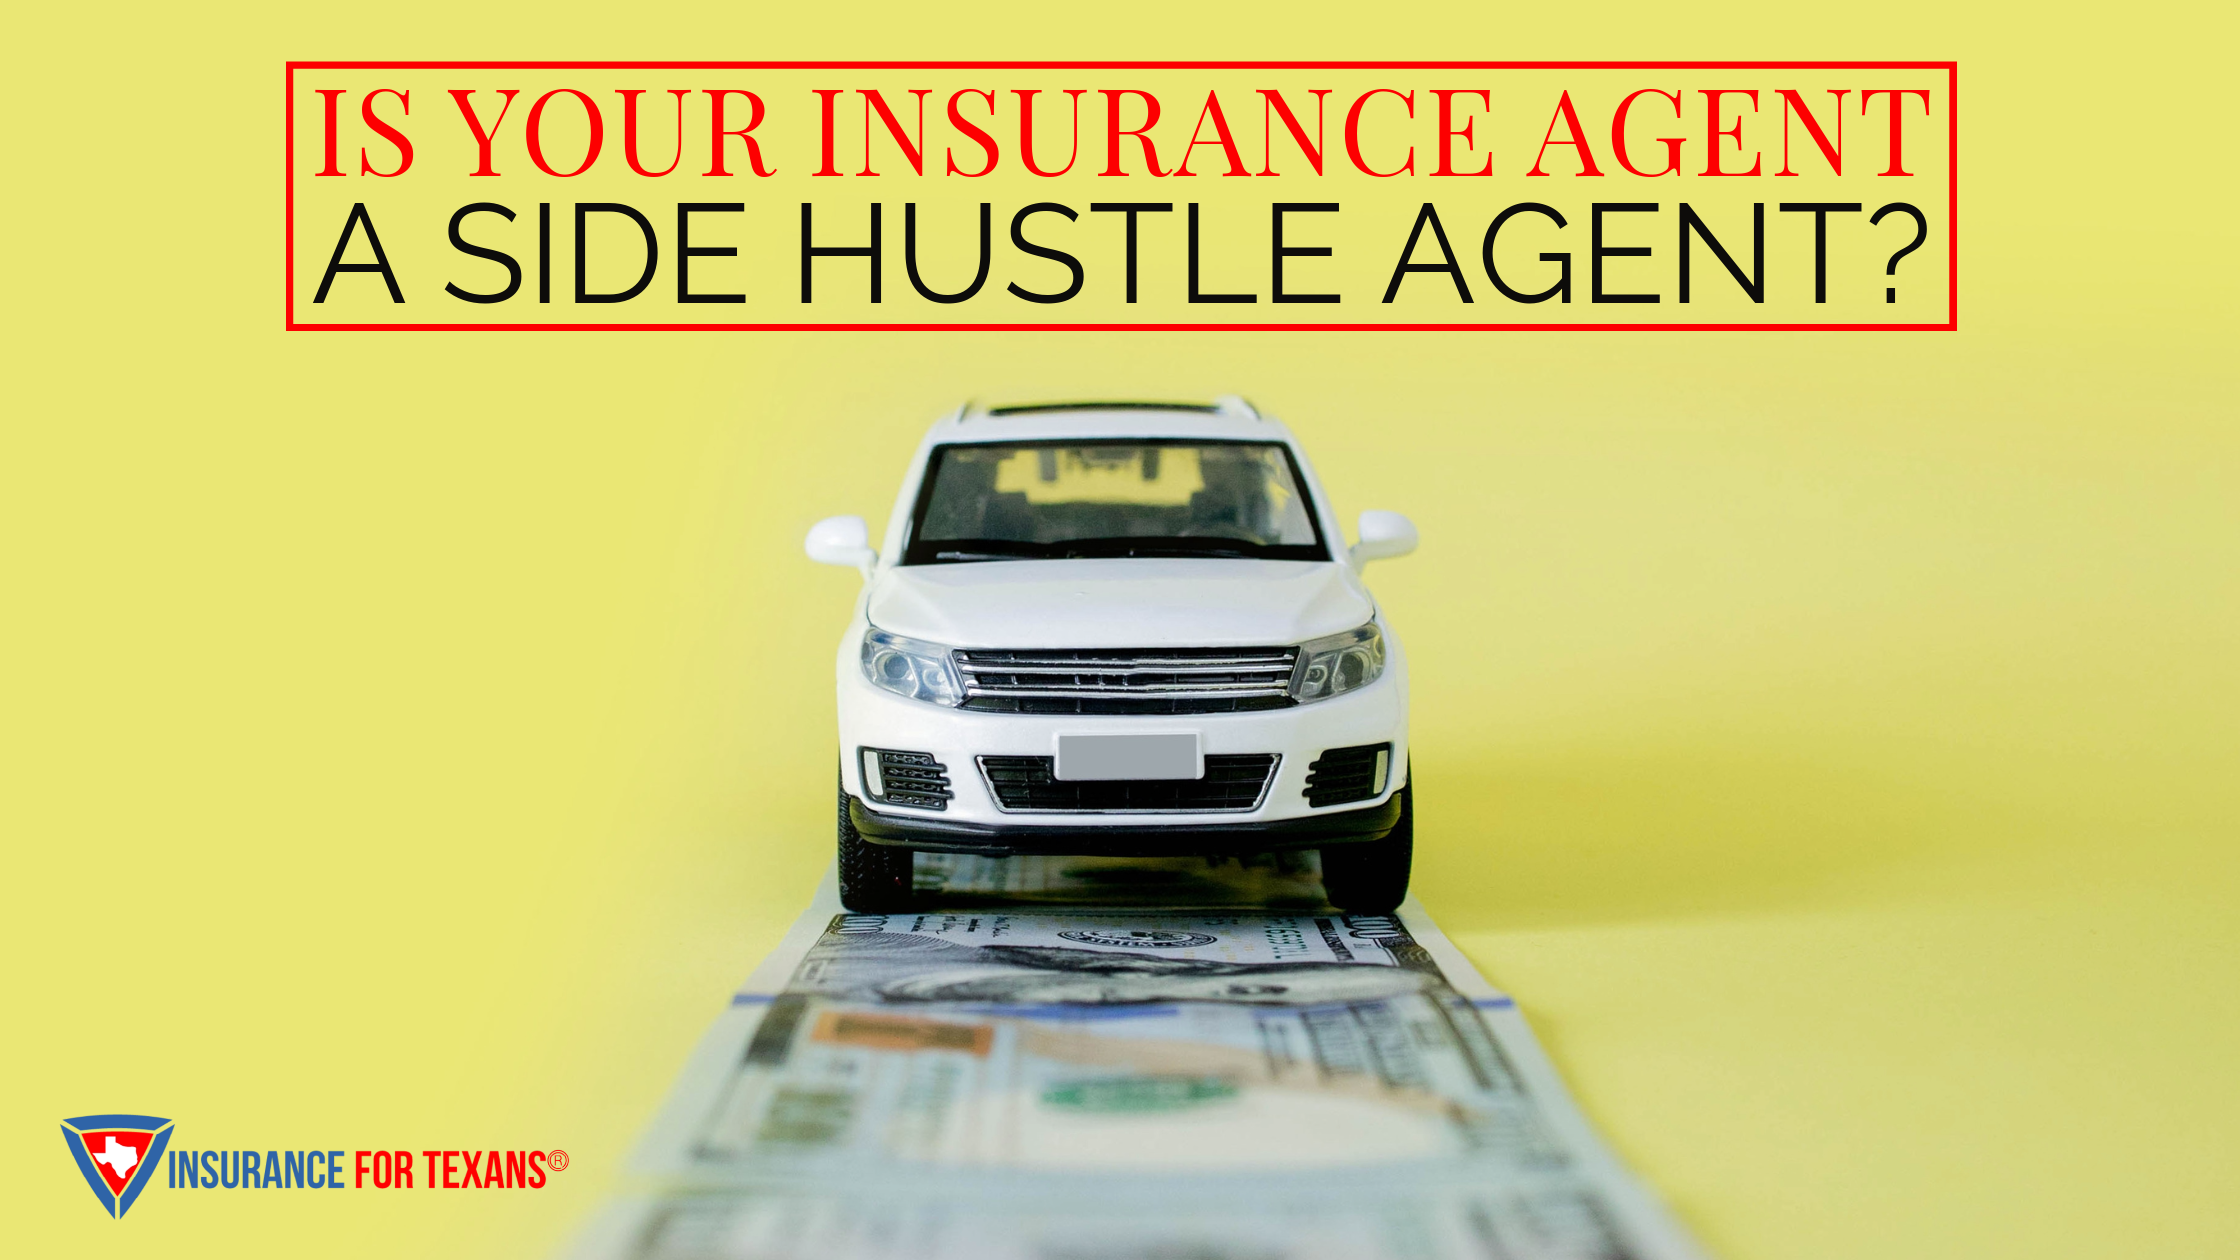 Is Your Insurance Agent A Side Hustle Agent?